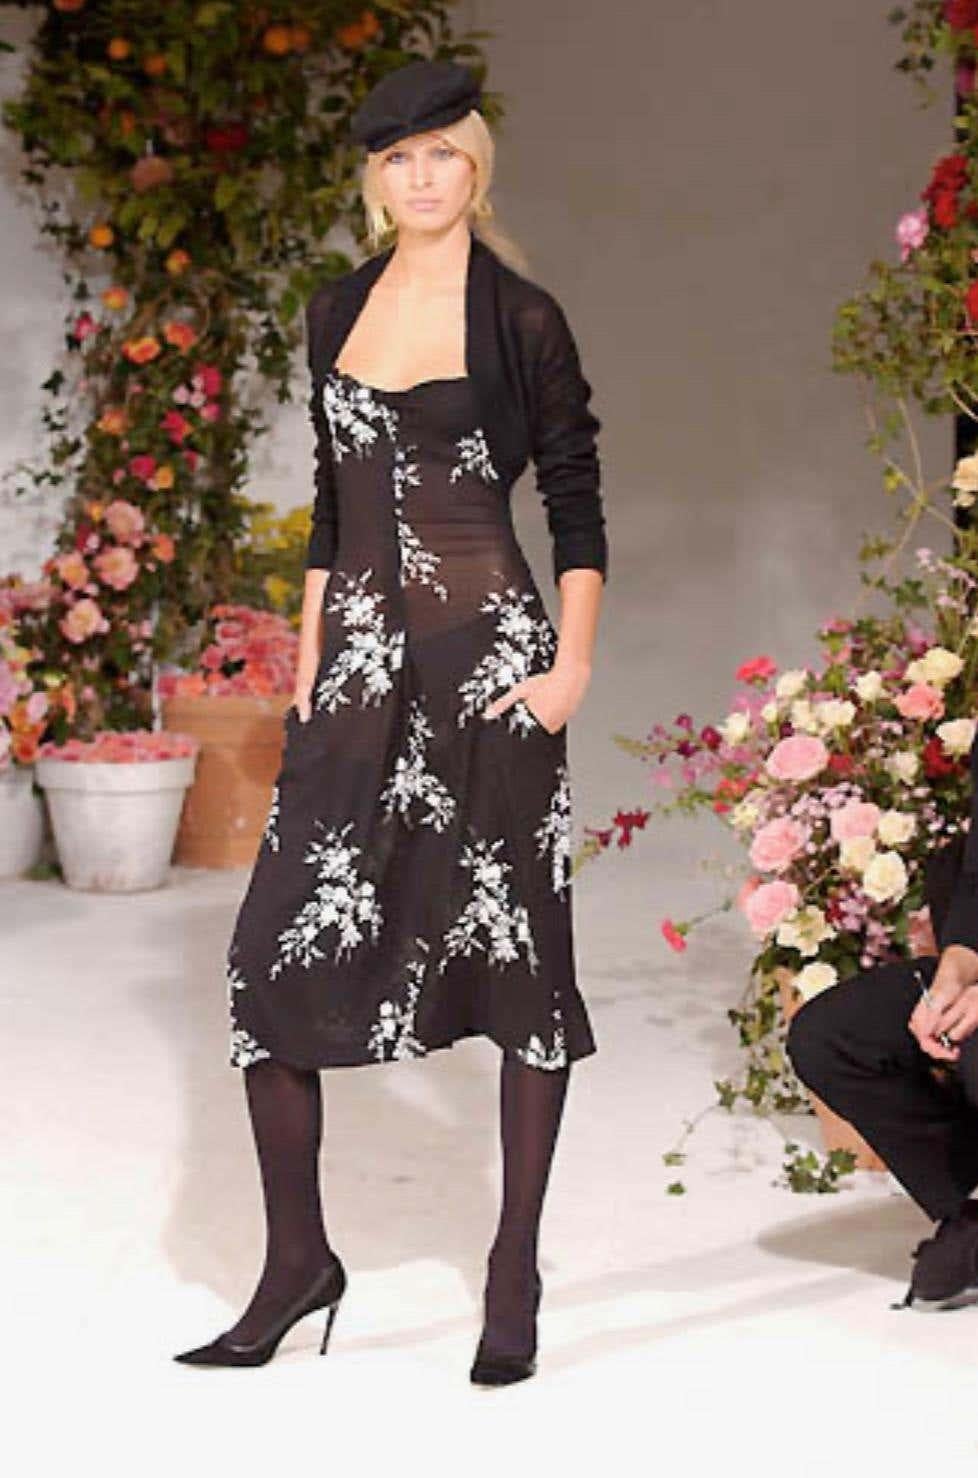 TheRealList presents: a stunning black and white floral Dolce and Gabbana mini dress. From the Spring/Summer 2002 collection, this dress debuted as part of look 14 modeled by Karolina Kurkova. This beautiful dress features a black and white floral